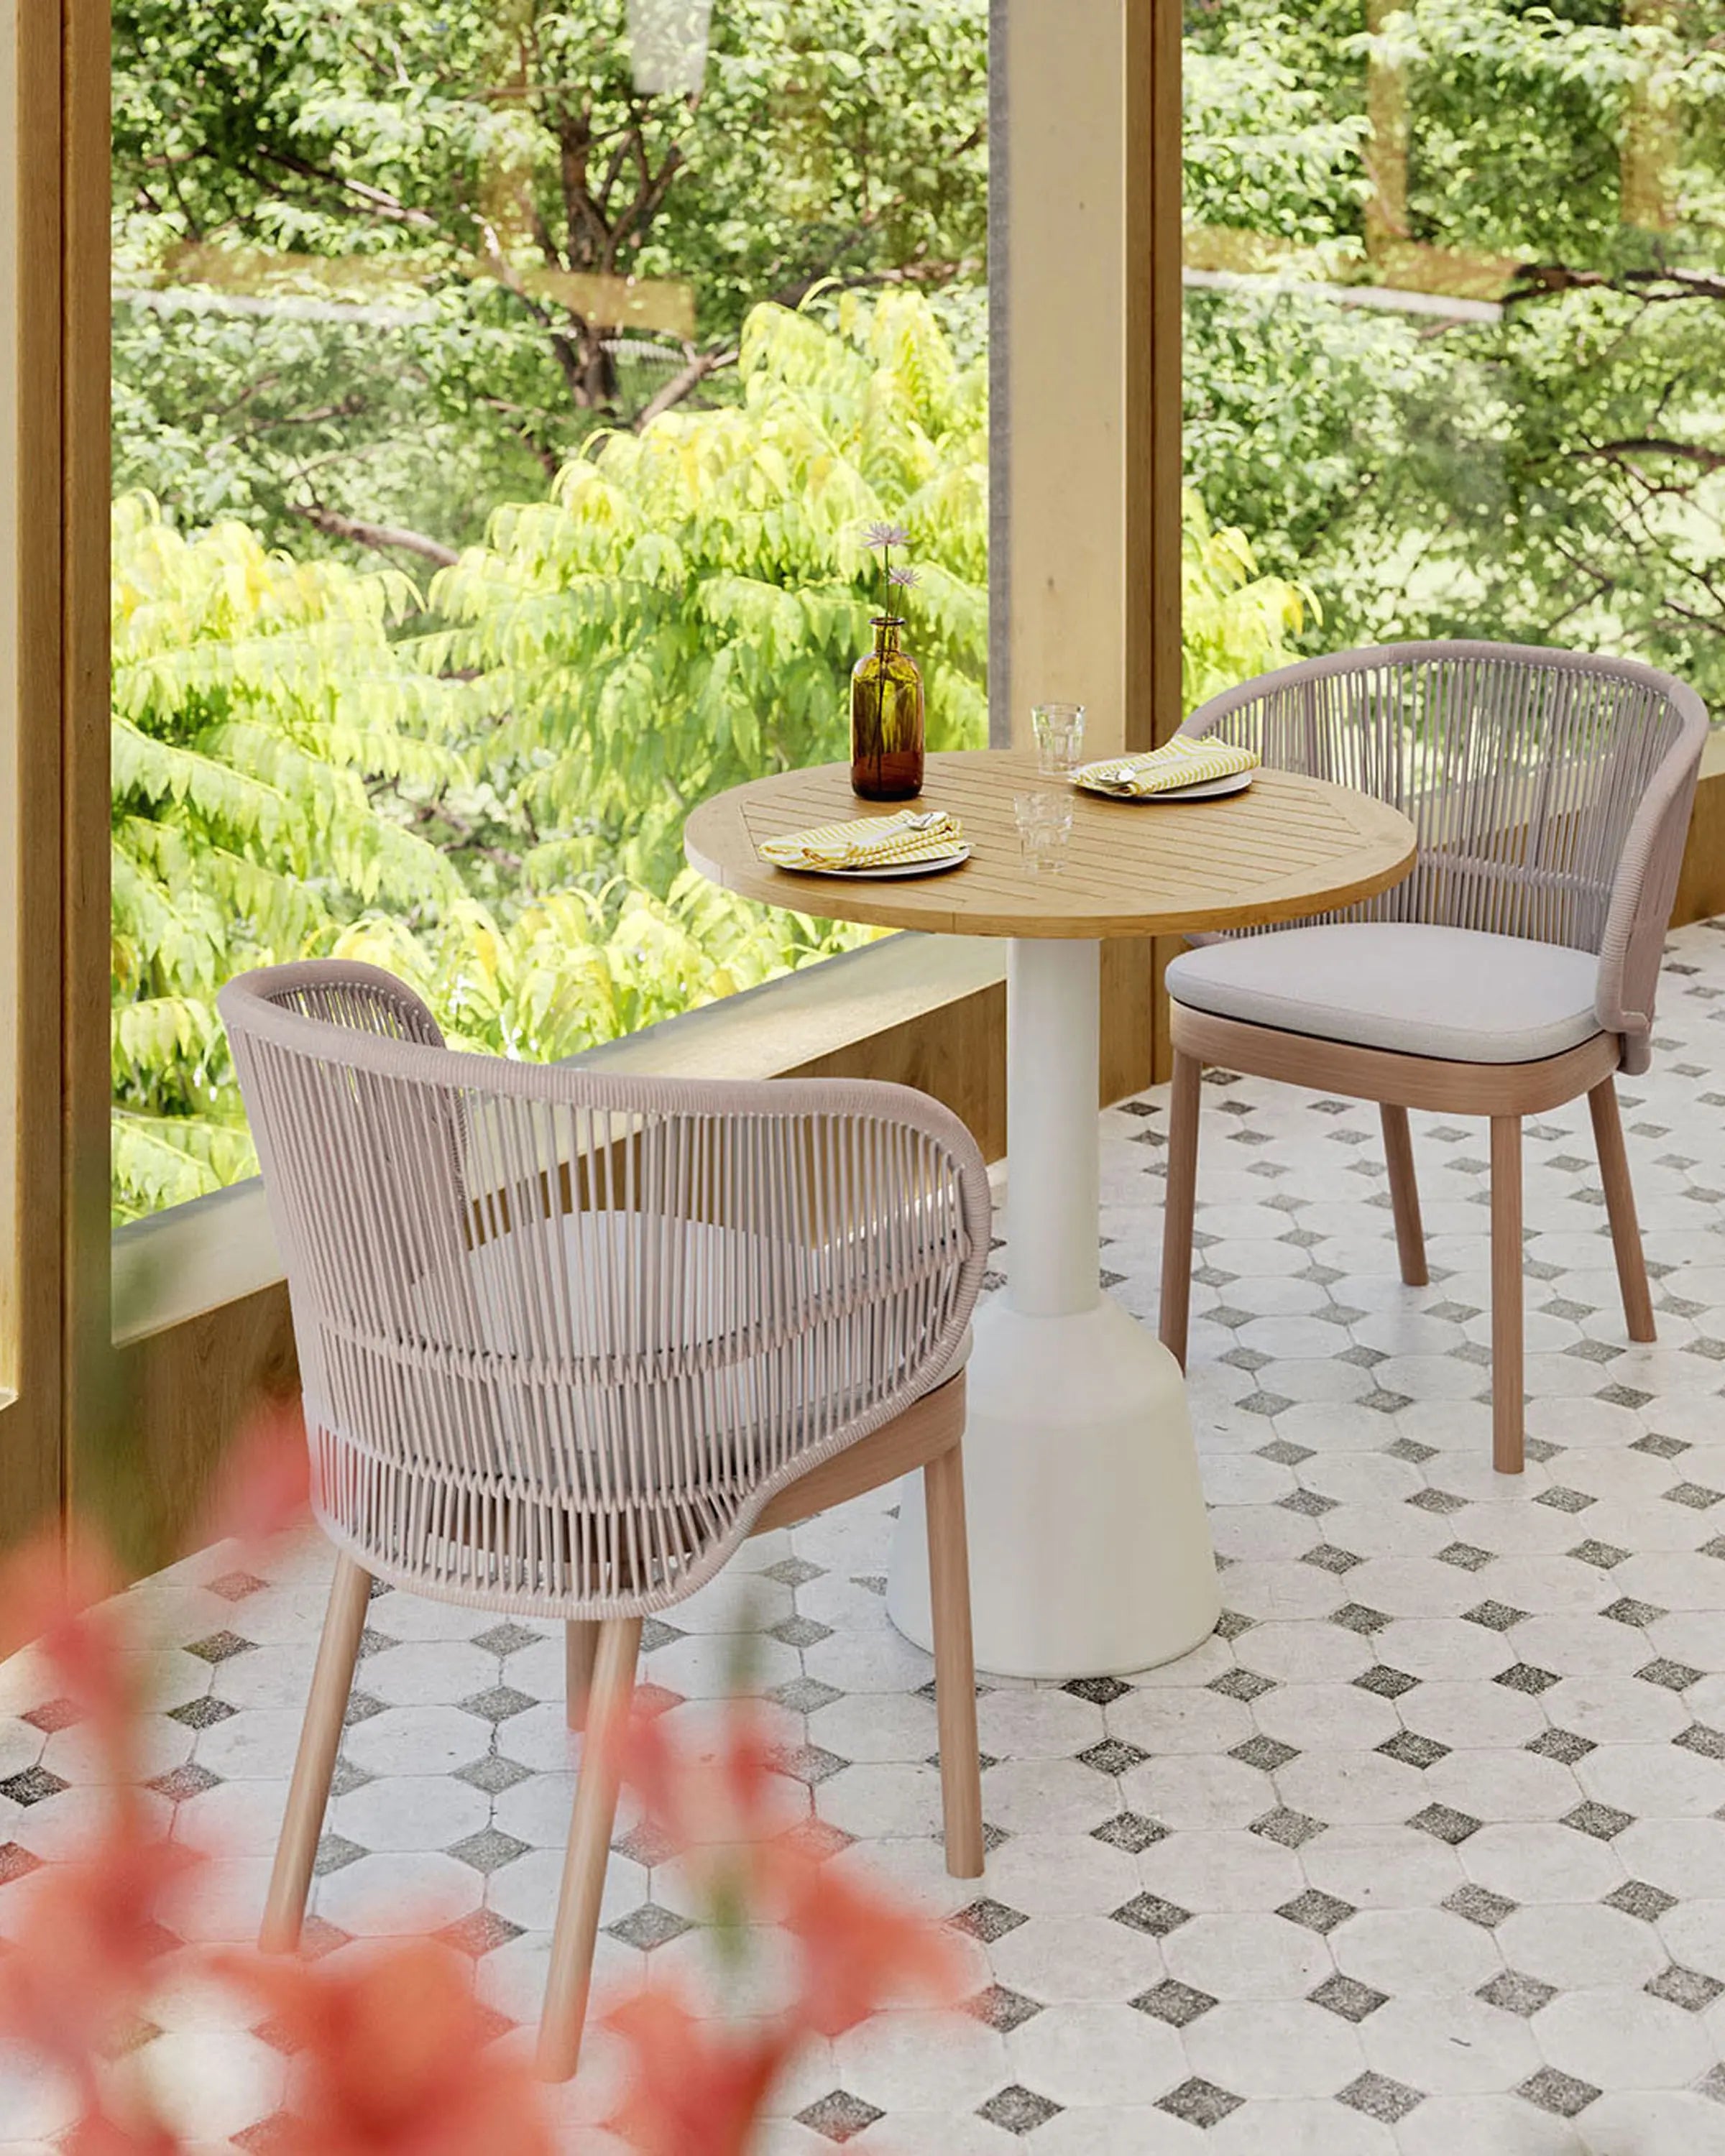 Shop Chairs for Stylish Dining